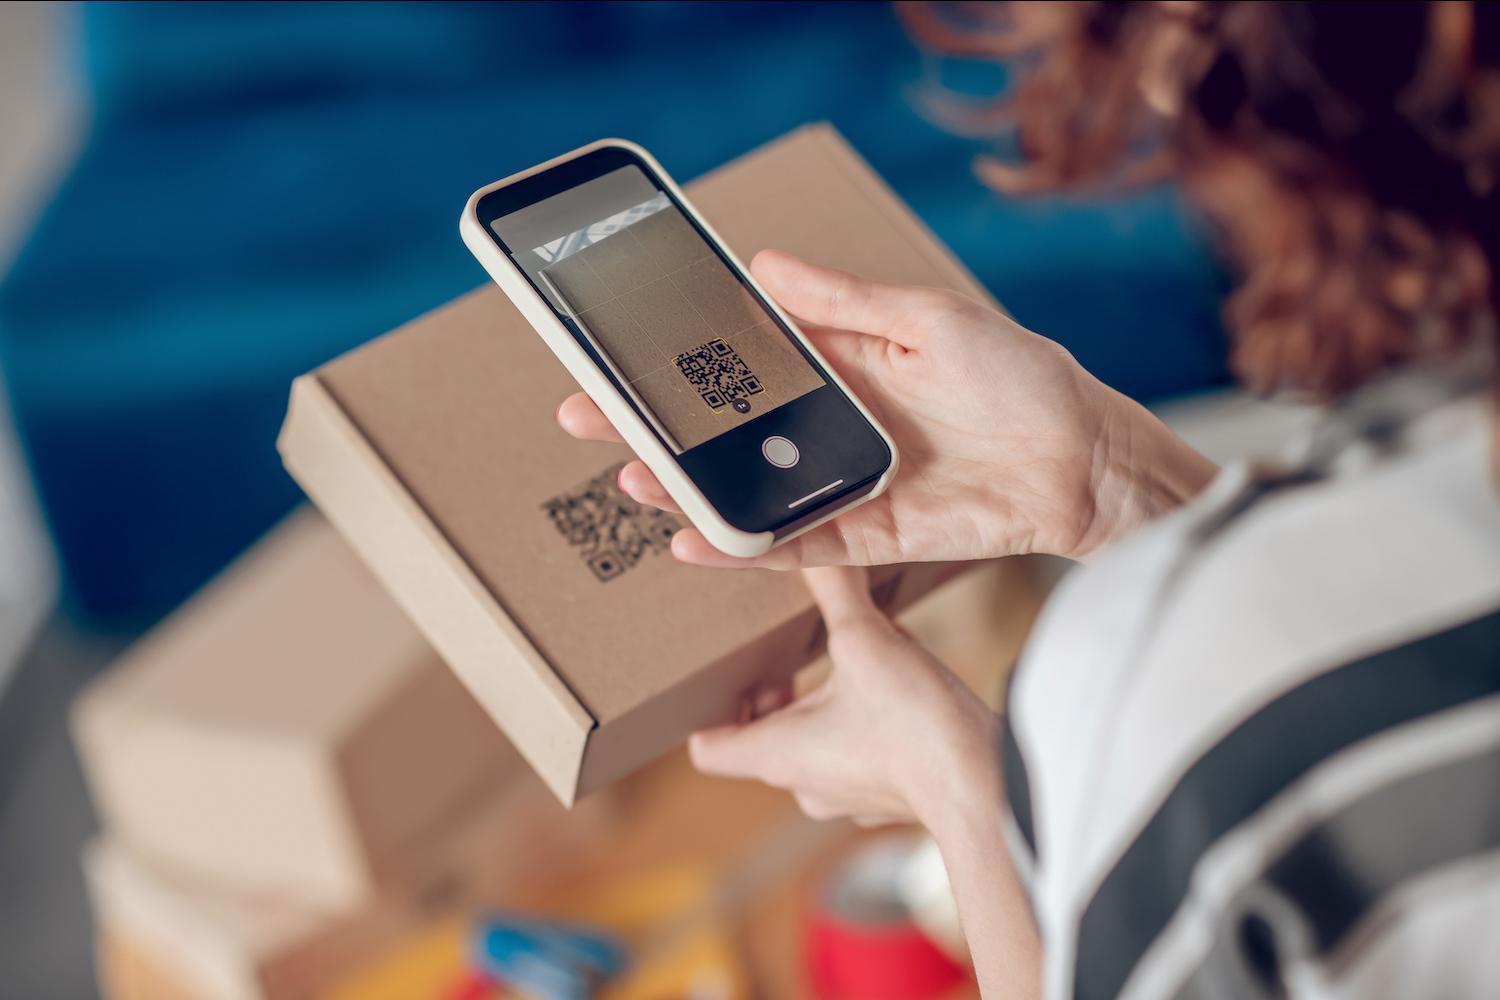 woman scanning QR code on box with phone - QR codes and other 2D barcodes can help brands communicate ESG and sustainability information